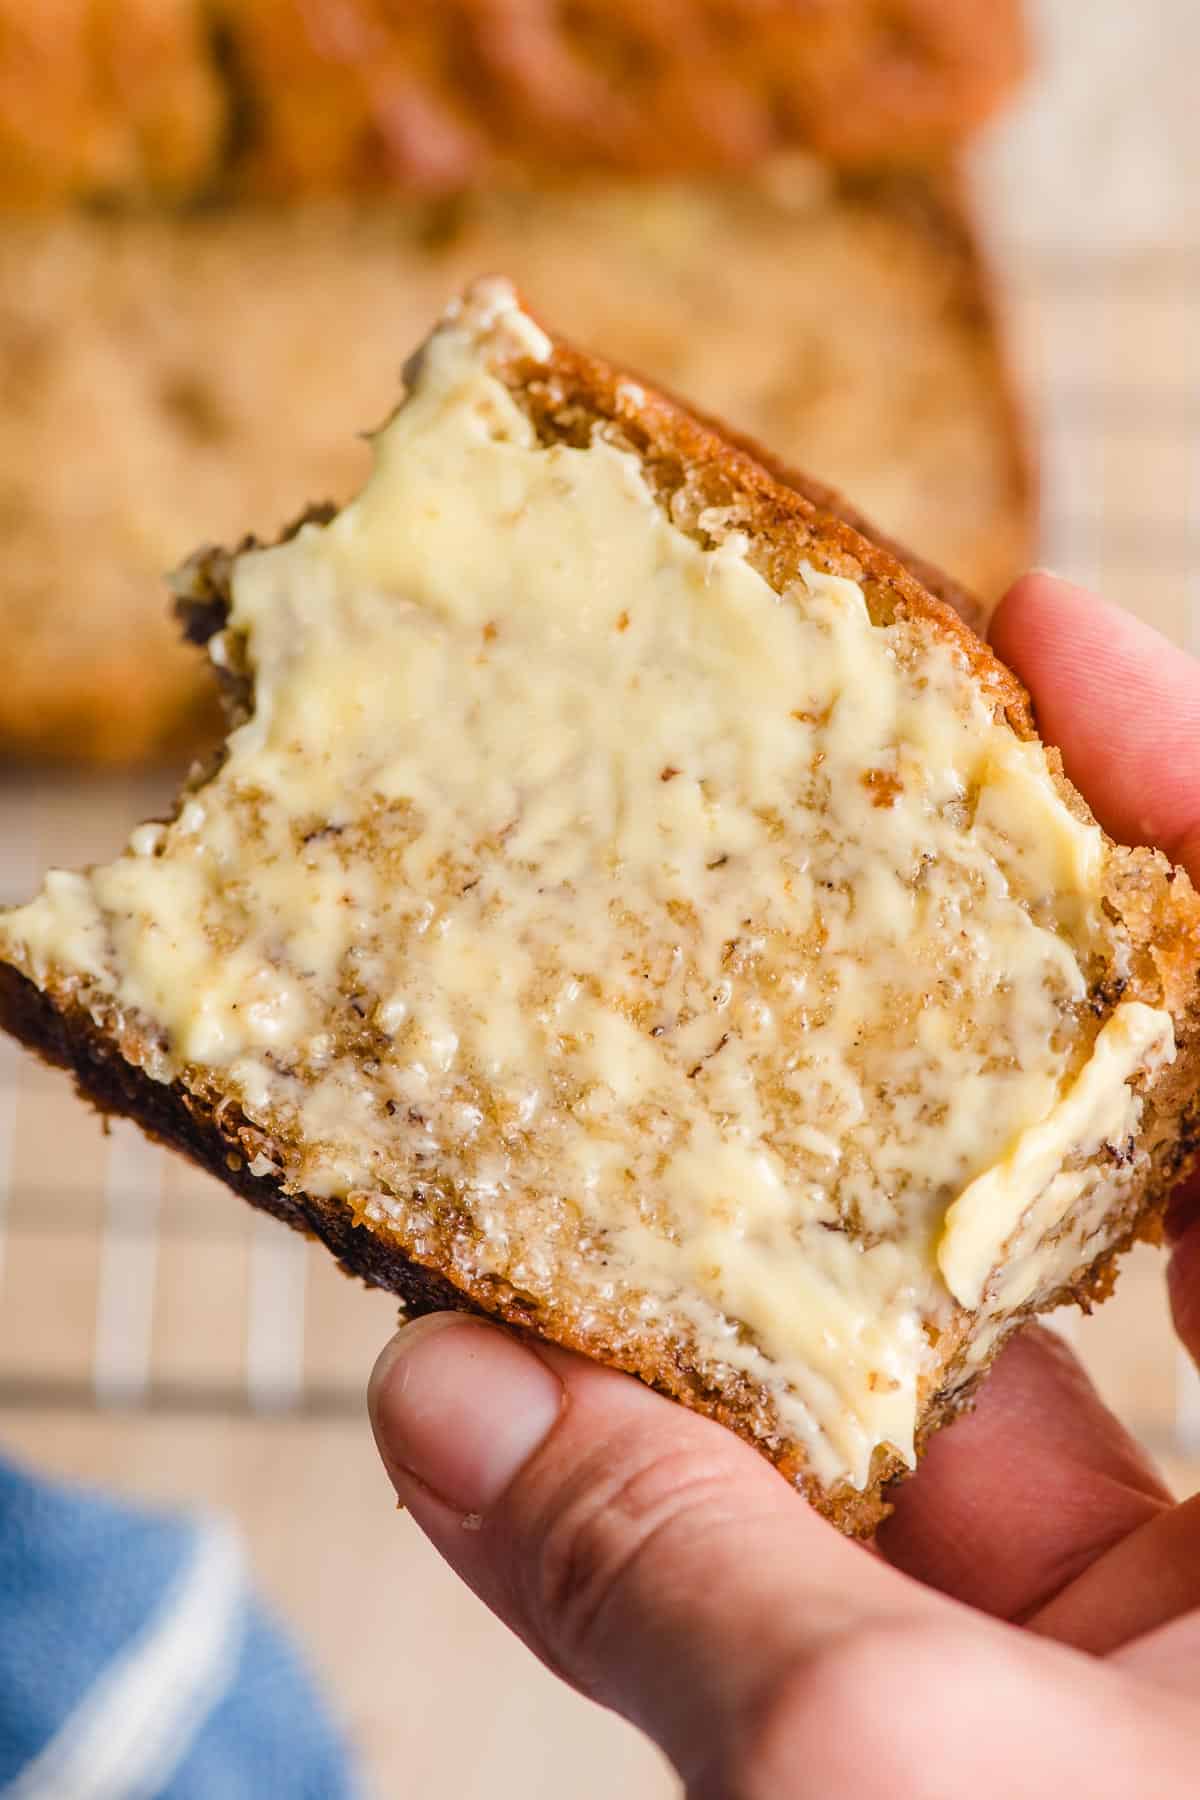 Slice of banana bread slathered in butter with a bite taken out of one corner.